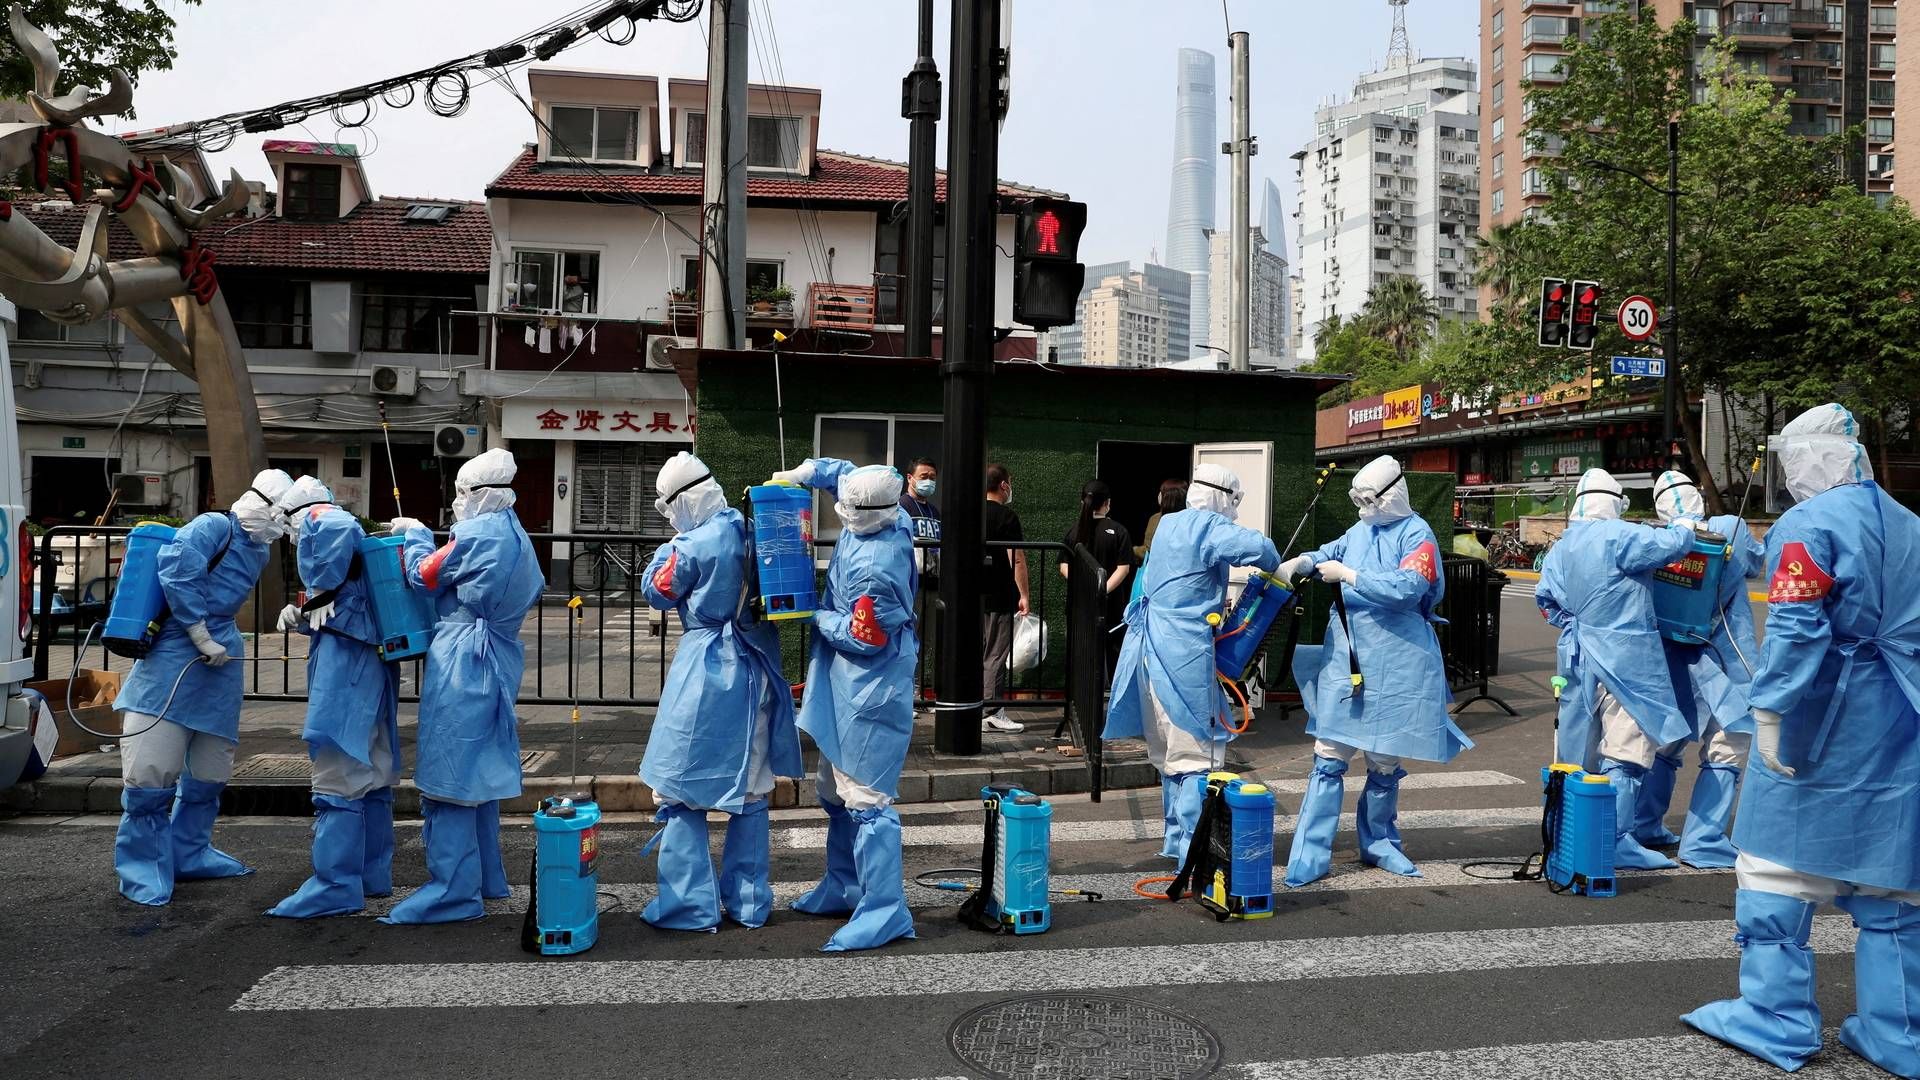 Authorities in the process of disinfecting a district in Shanghai, which has been shut down for weeks due to Covid outbreaks. | Photo: CHINA DAILY/via REUTERS / X01745